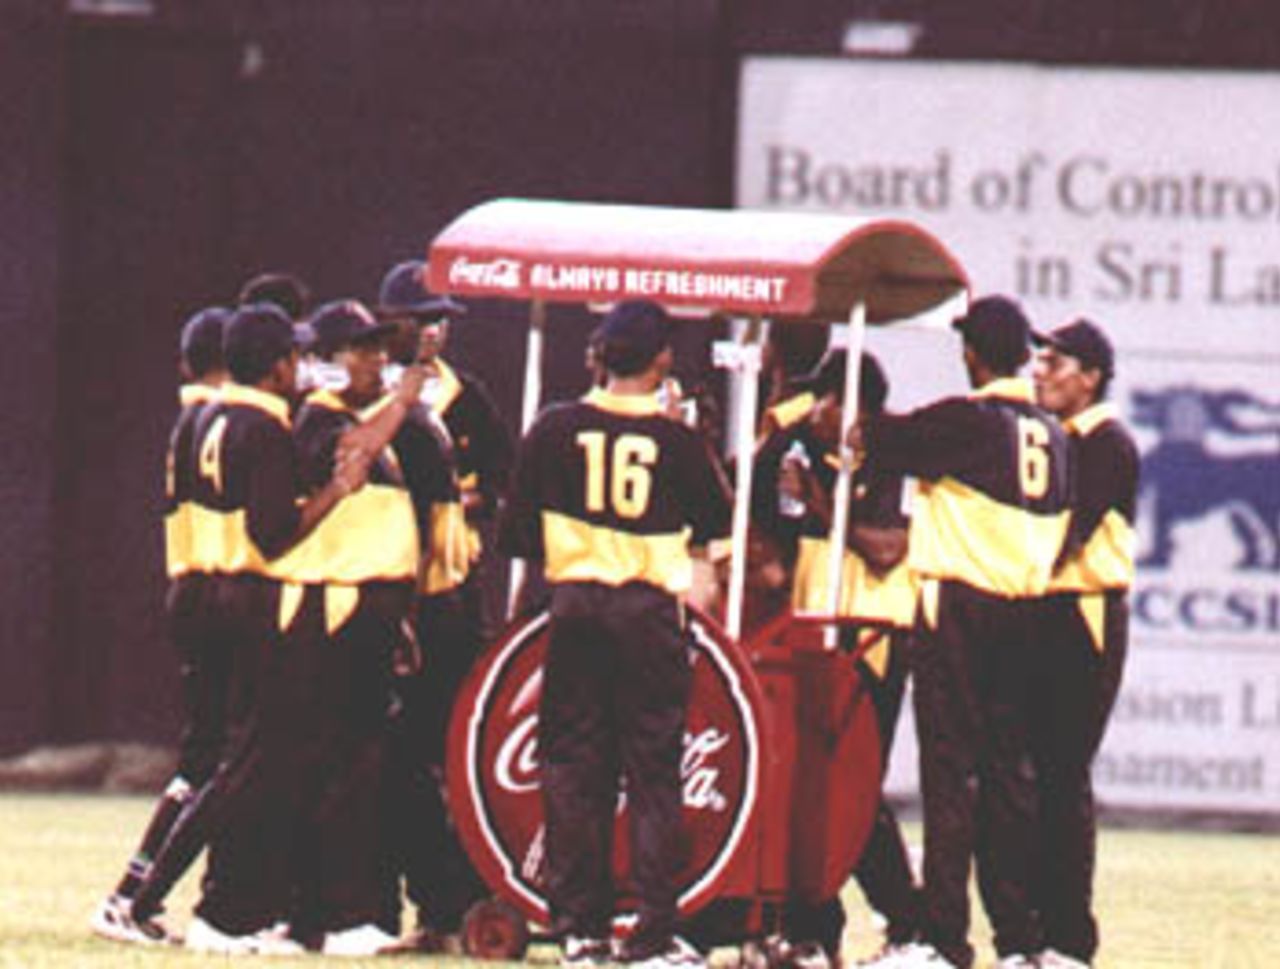 The SSC players gather around the water truck during the CCC vs SSC semi final at Premadasa International Stadium